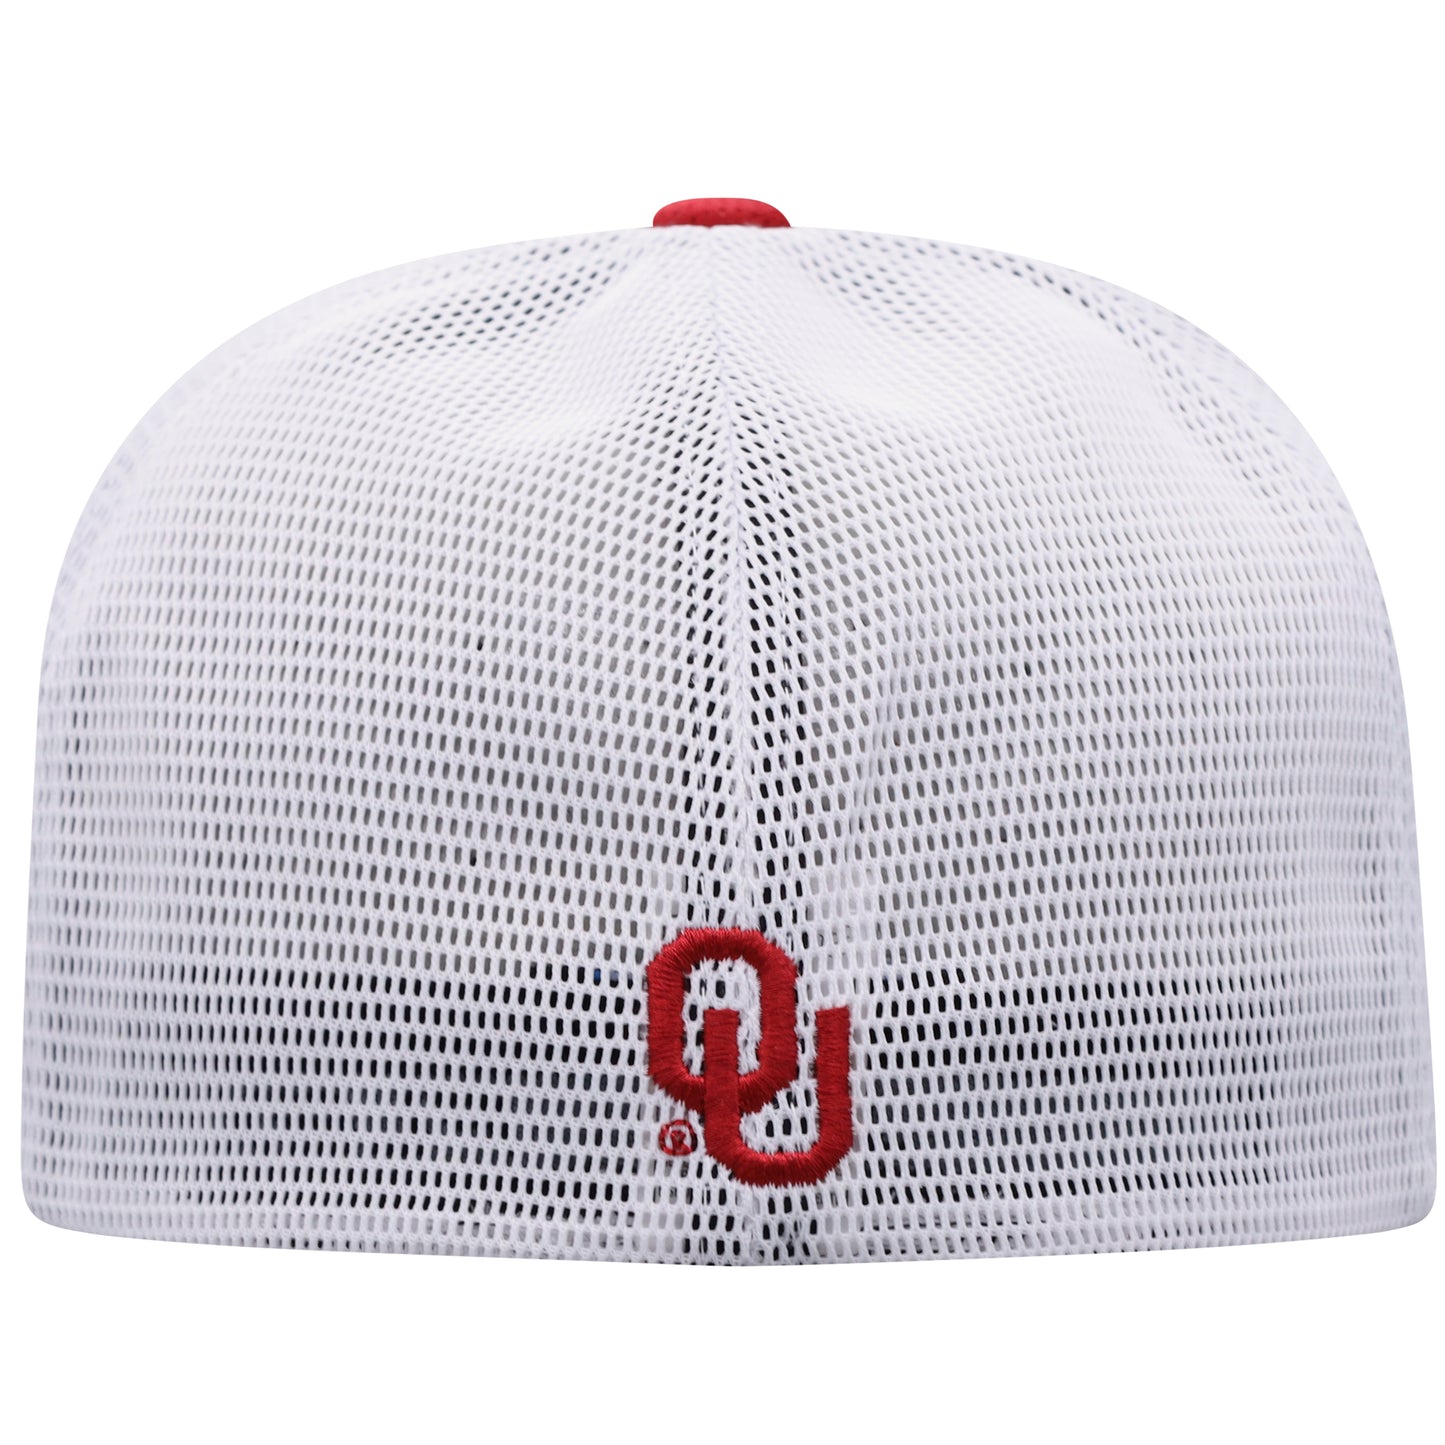 Men's Oklahoma Sooners Stamp 3-Tone Flex Fit Hat By Top Of the World